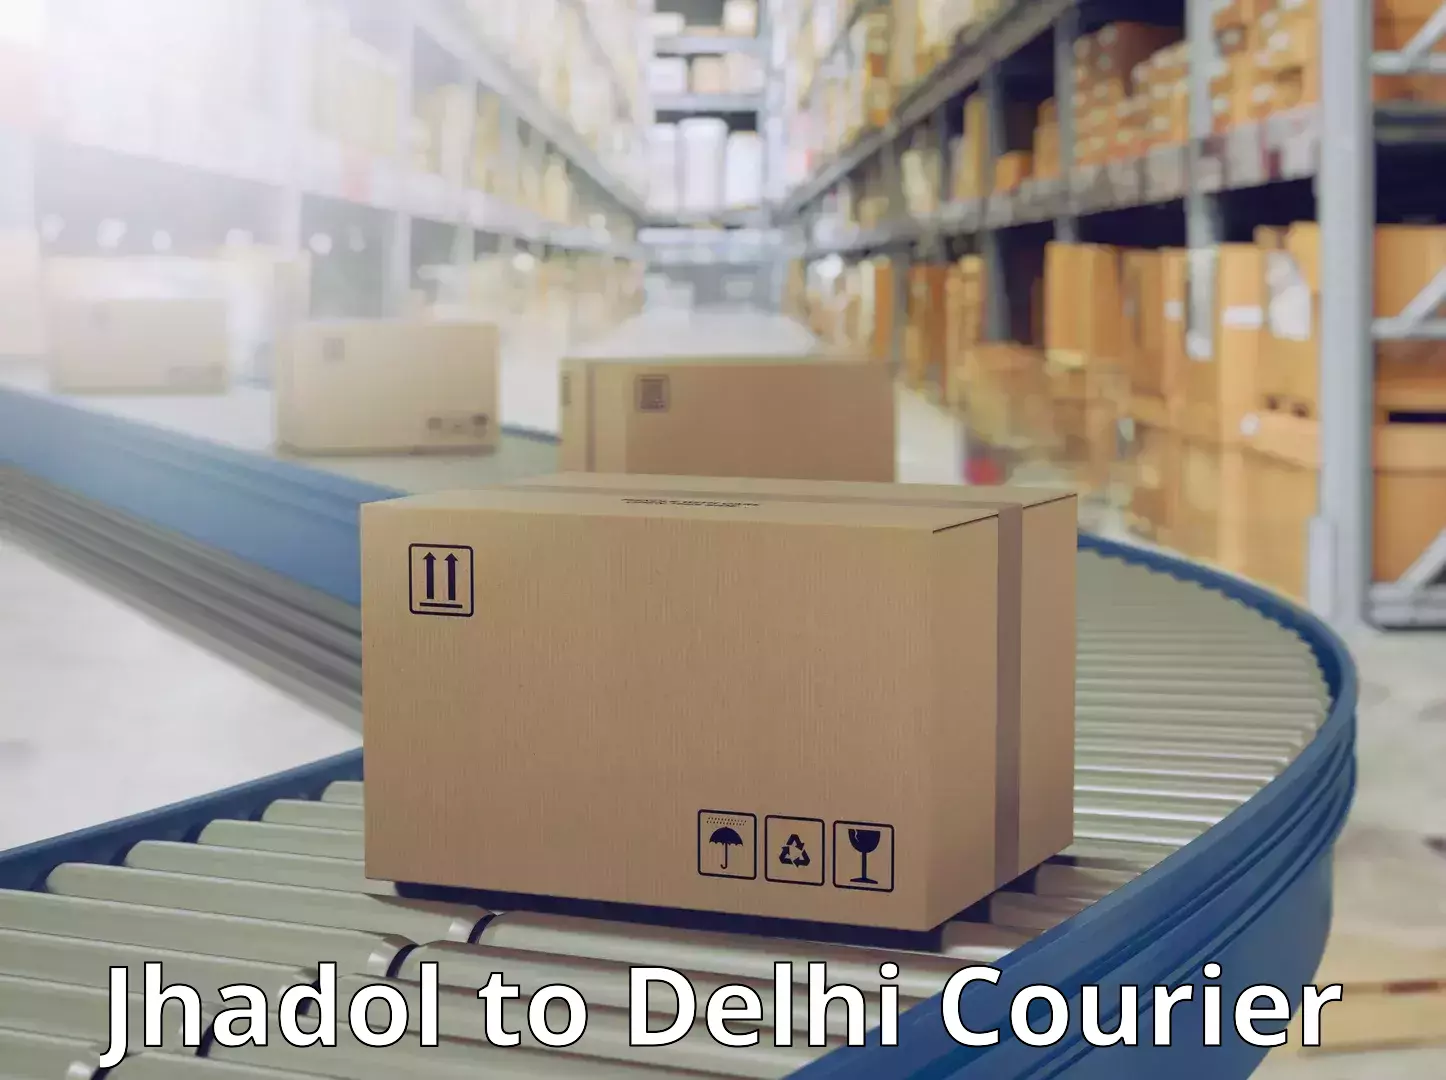 Seamless shipping service Jhadol to East Delhi